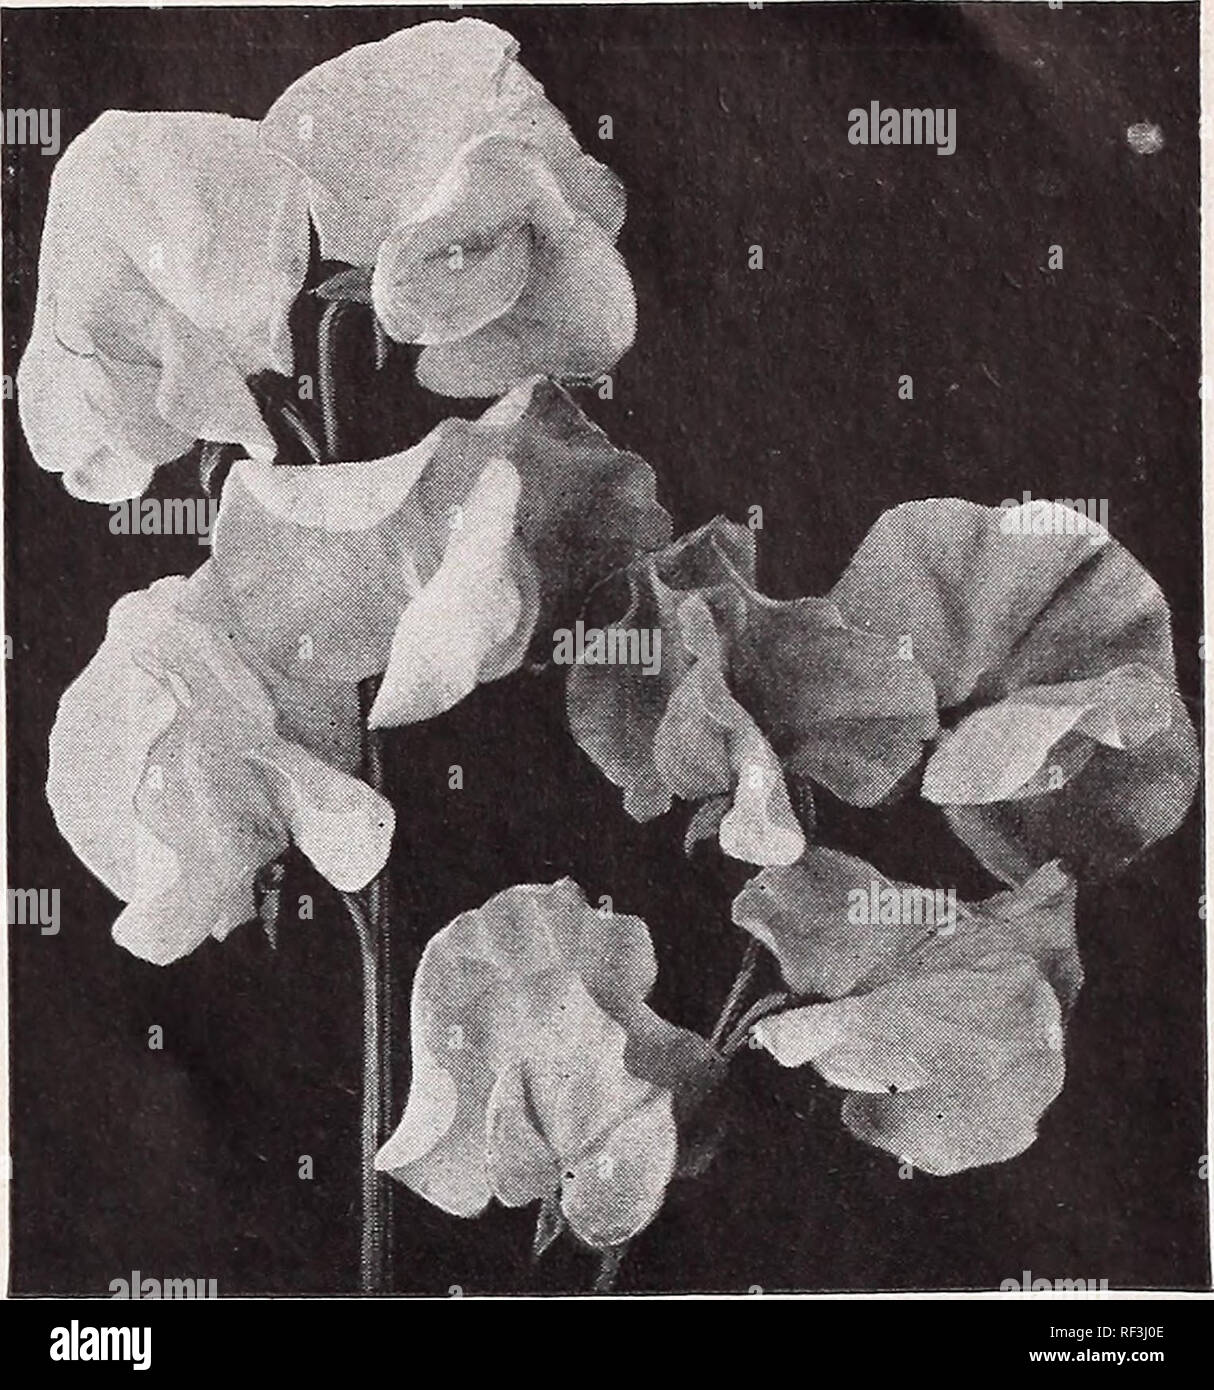 . [Catalog] : spring 1950. Nurseries (Horticulture) North Carolina Raleigh Catalogs; Nursery stock North Carolina Raleigh Catalogs; Seeds North Carolina Raleigh Catalogs; Bulbs (Plants) North Carolina Raleigh Catalogs; Vegetables North Carolina Raleigh Catalogs; Gardening Nort. WYATTS GIANT ORCHID FLOWERING Spencer Sweet Pea£ CULTURE: One ounce will sow from 15 to 20 feet. Sow from, November to March. For spring plantings we recommend the sowing of Sweet Pea seeds slightly below the ground level in a bed thoroughly pulverized 2 feet wide by 12 to 18 inches deep. Well rotted (but no other; comp Stock Photo